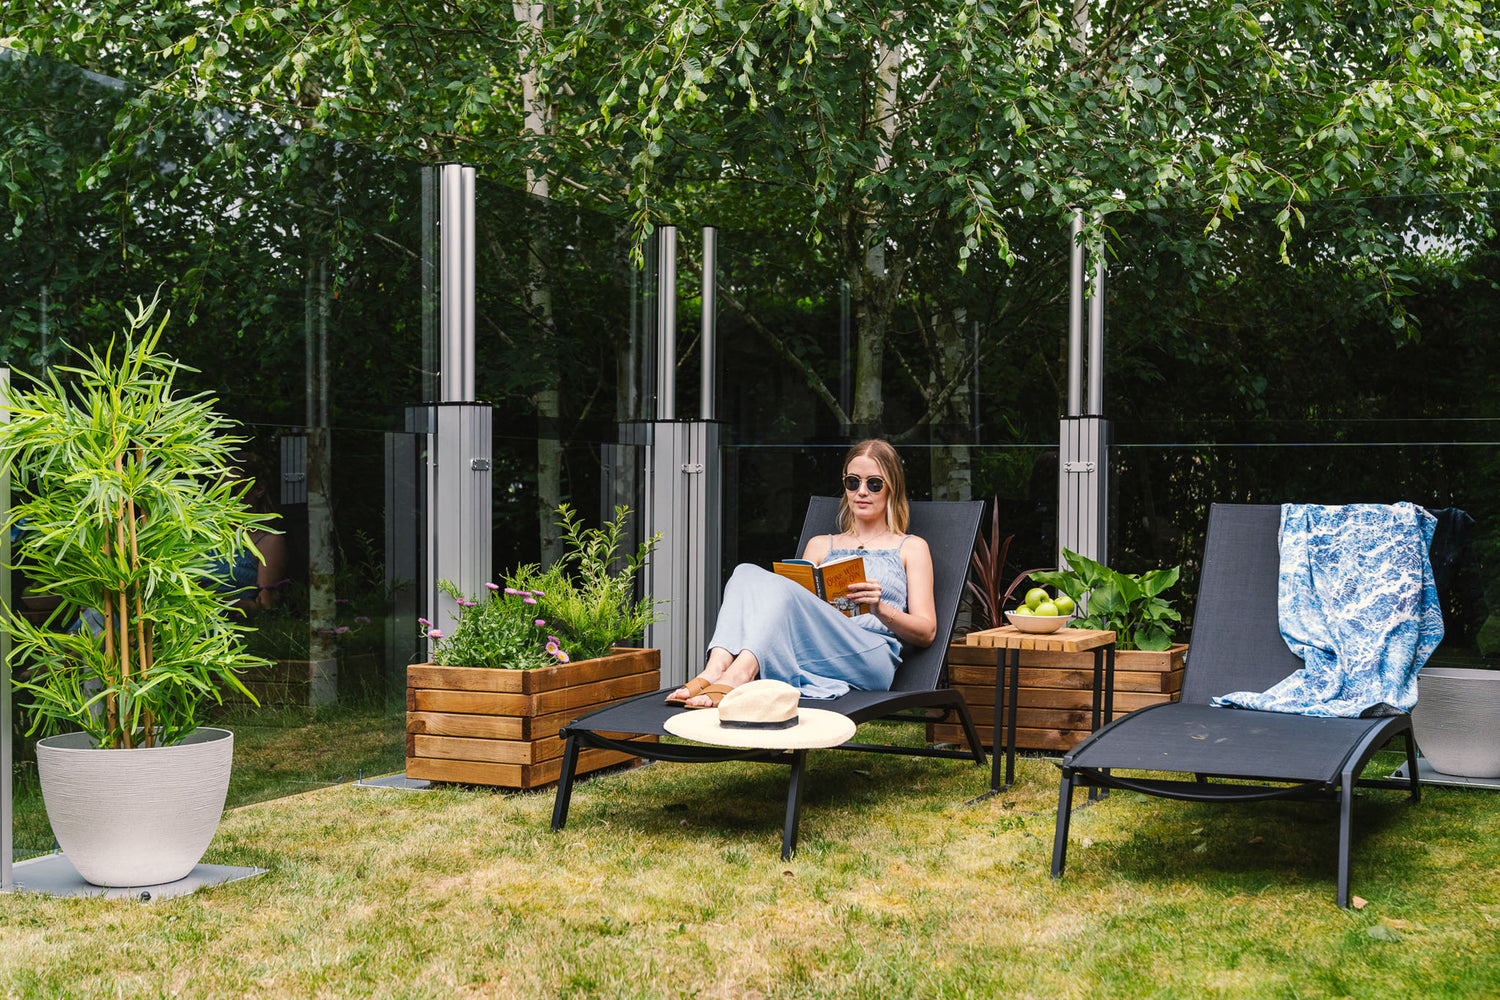 women reading a book on a sunlounge with glass windbreakers framing the green space